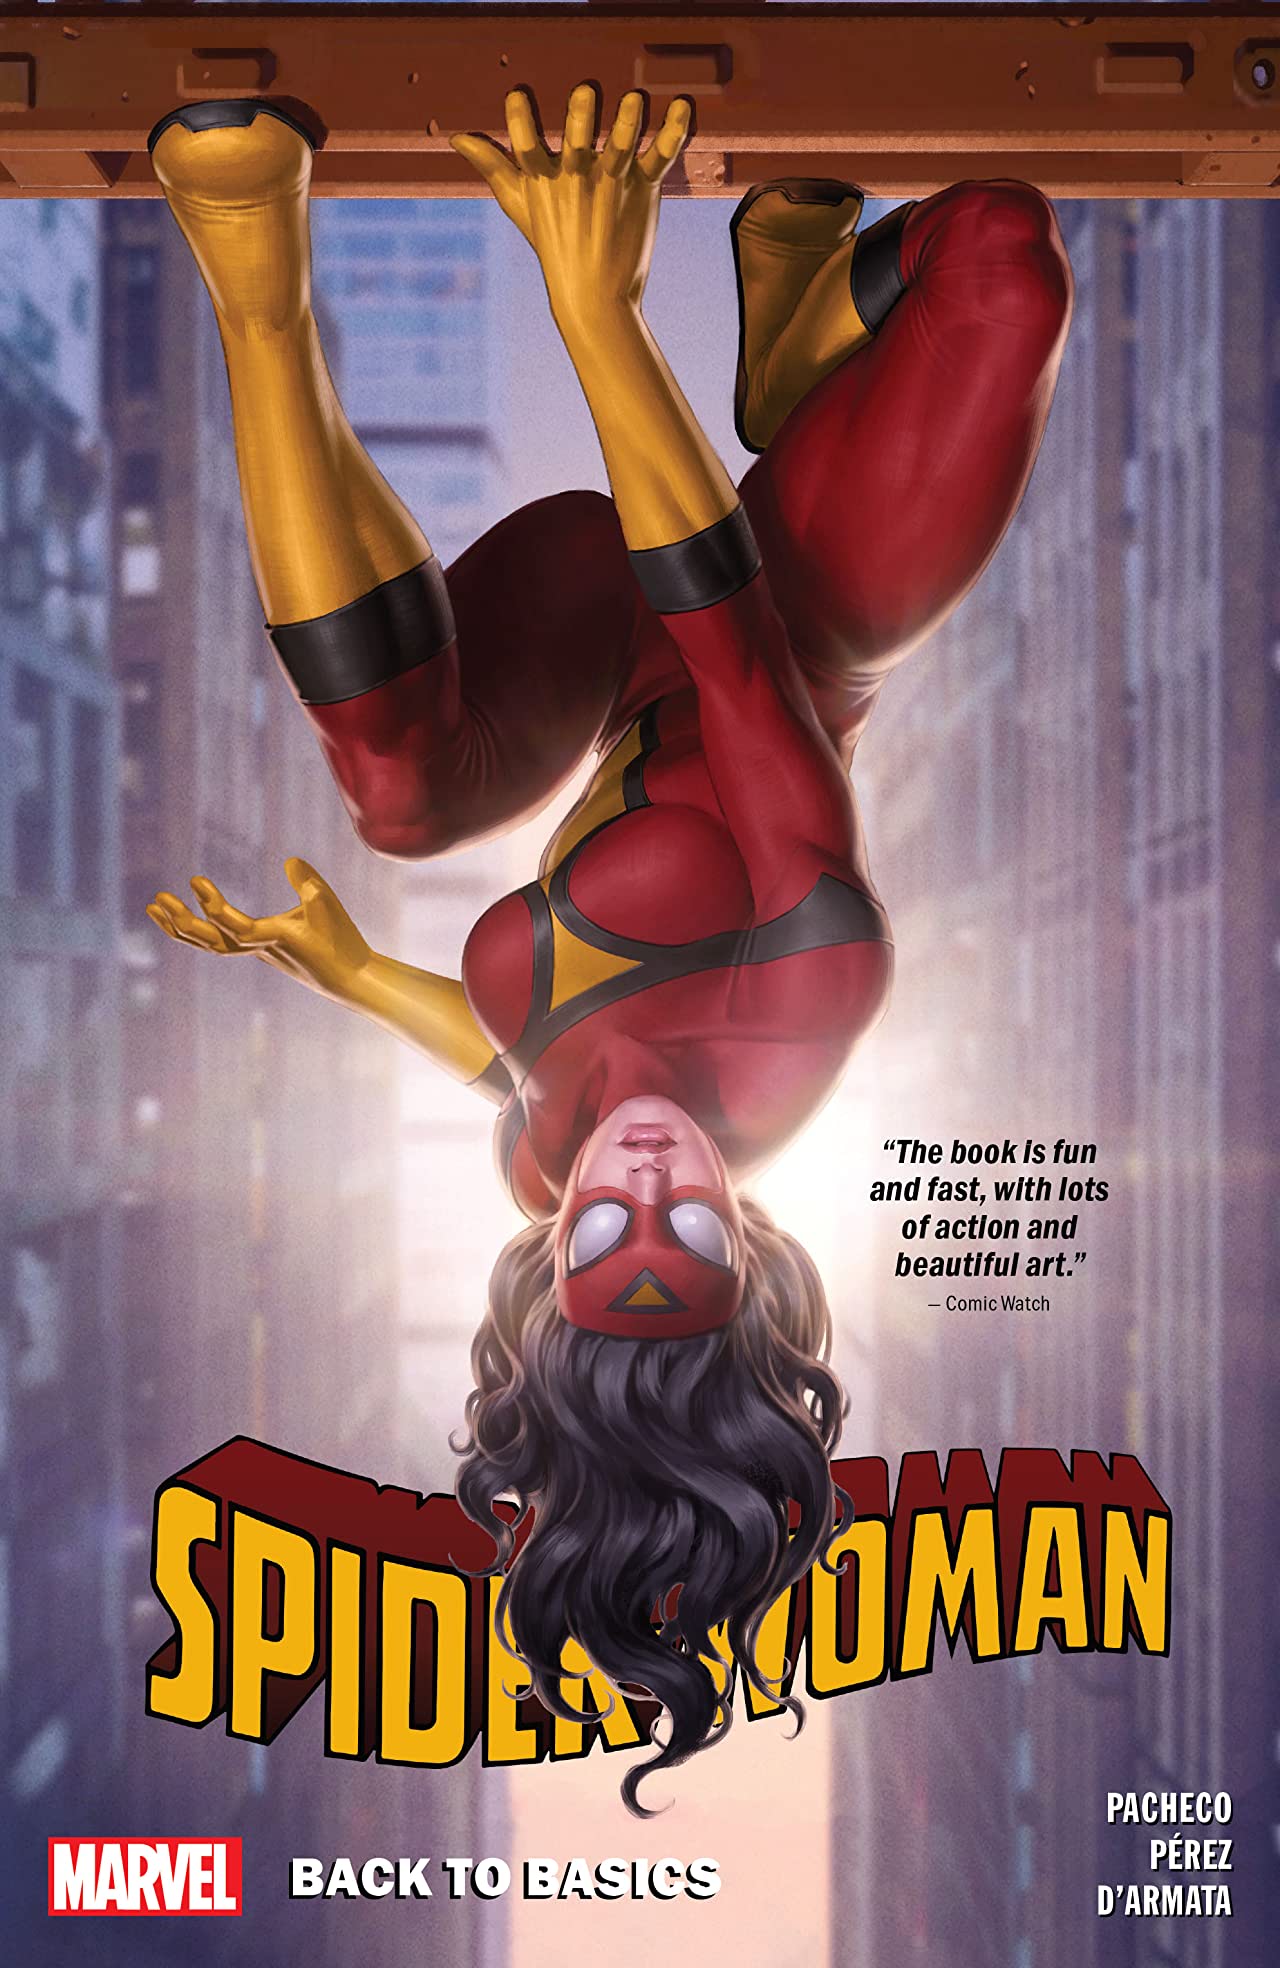 Spider-Woman Vol. 3: Back To Basics (Trade Paperback)